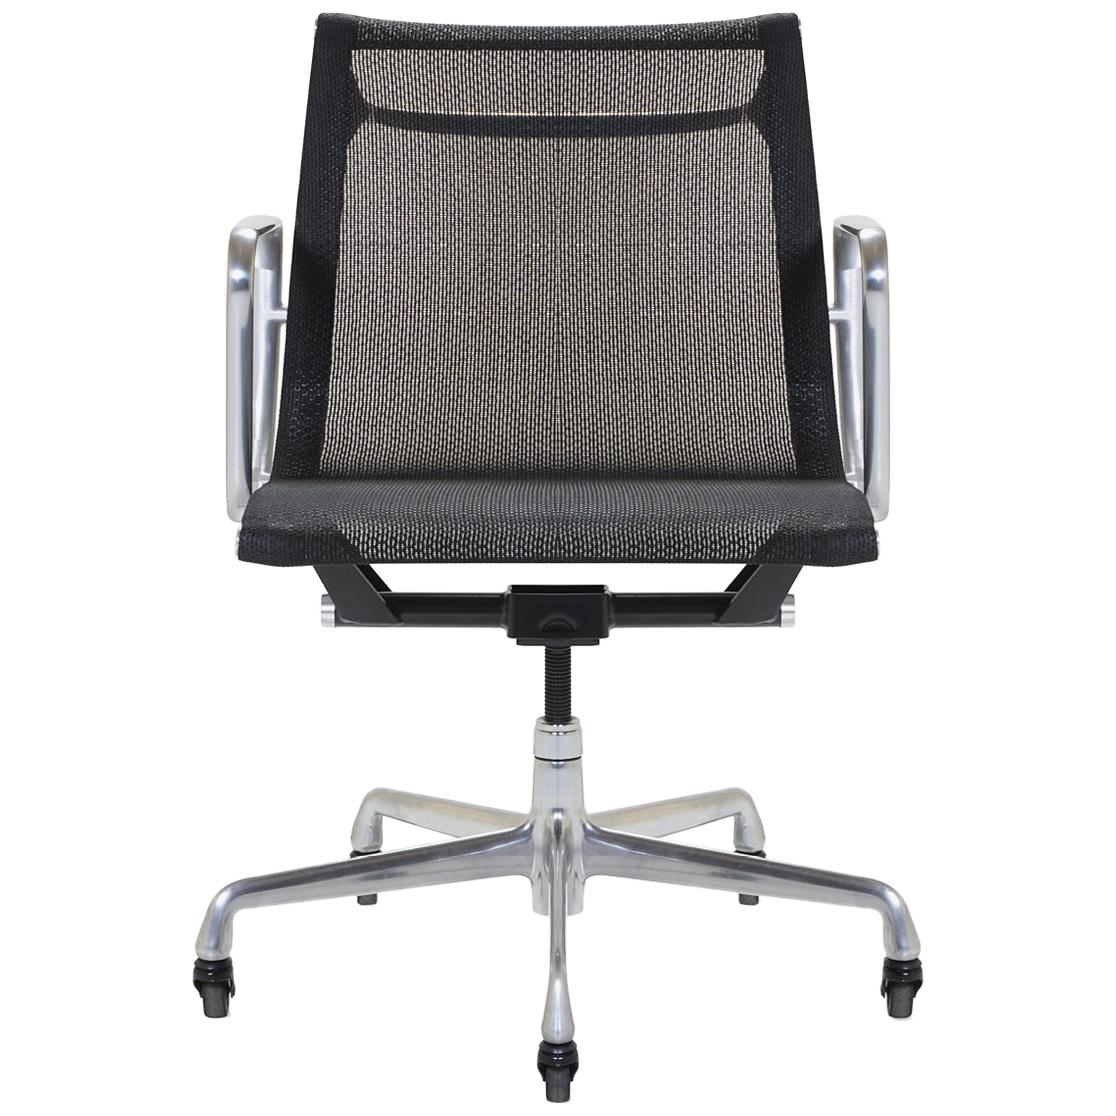 Aluminum Group Management Chair by Charles & Ray Eames for Herman Miller